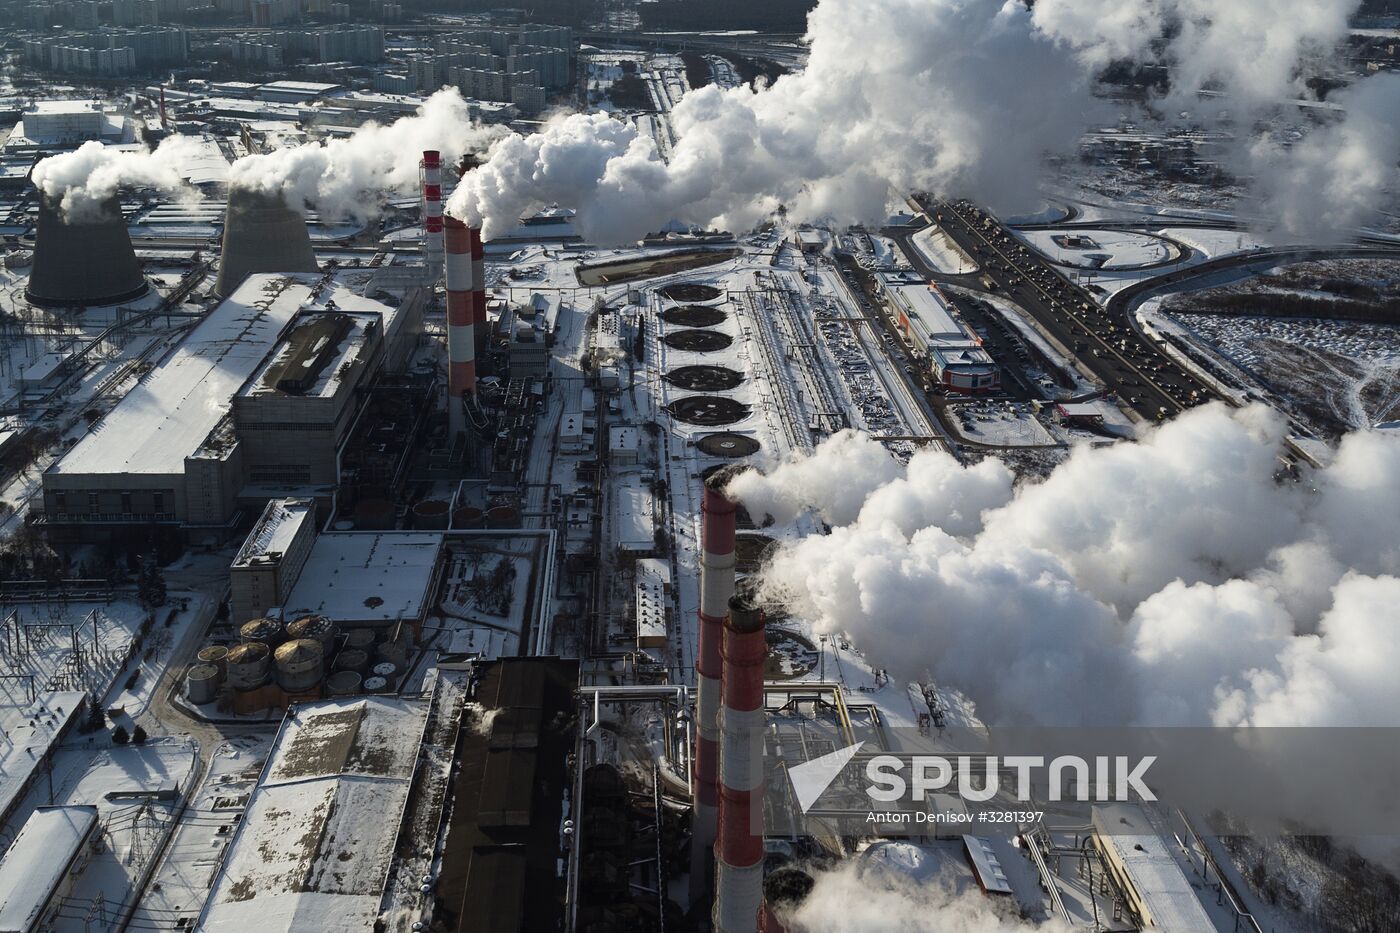 Thermal Power Plant-21 in Moscow